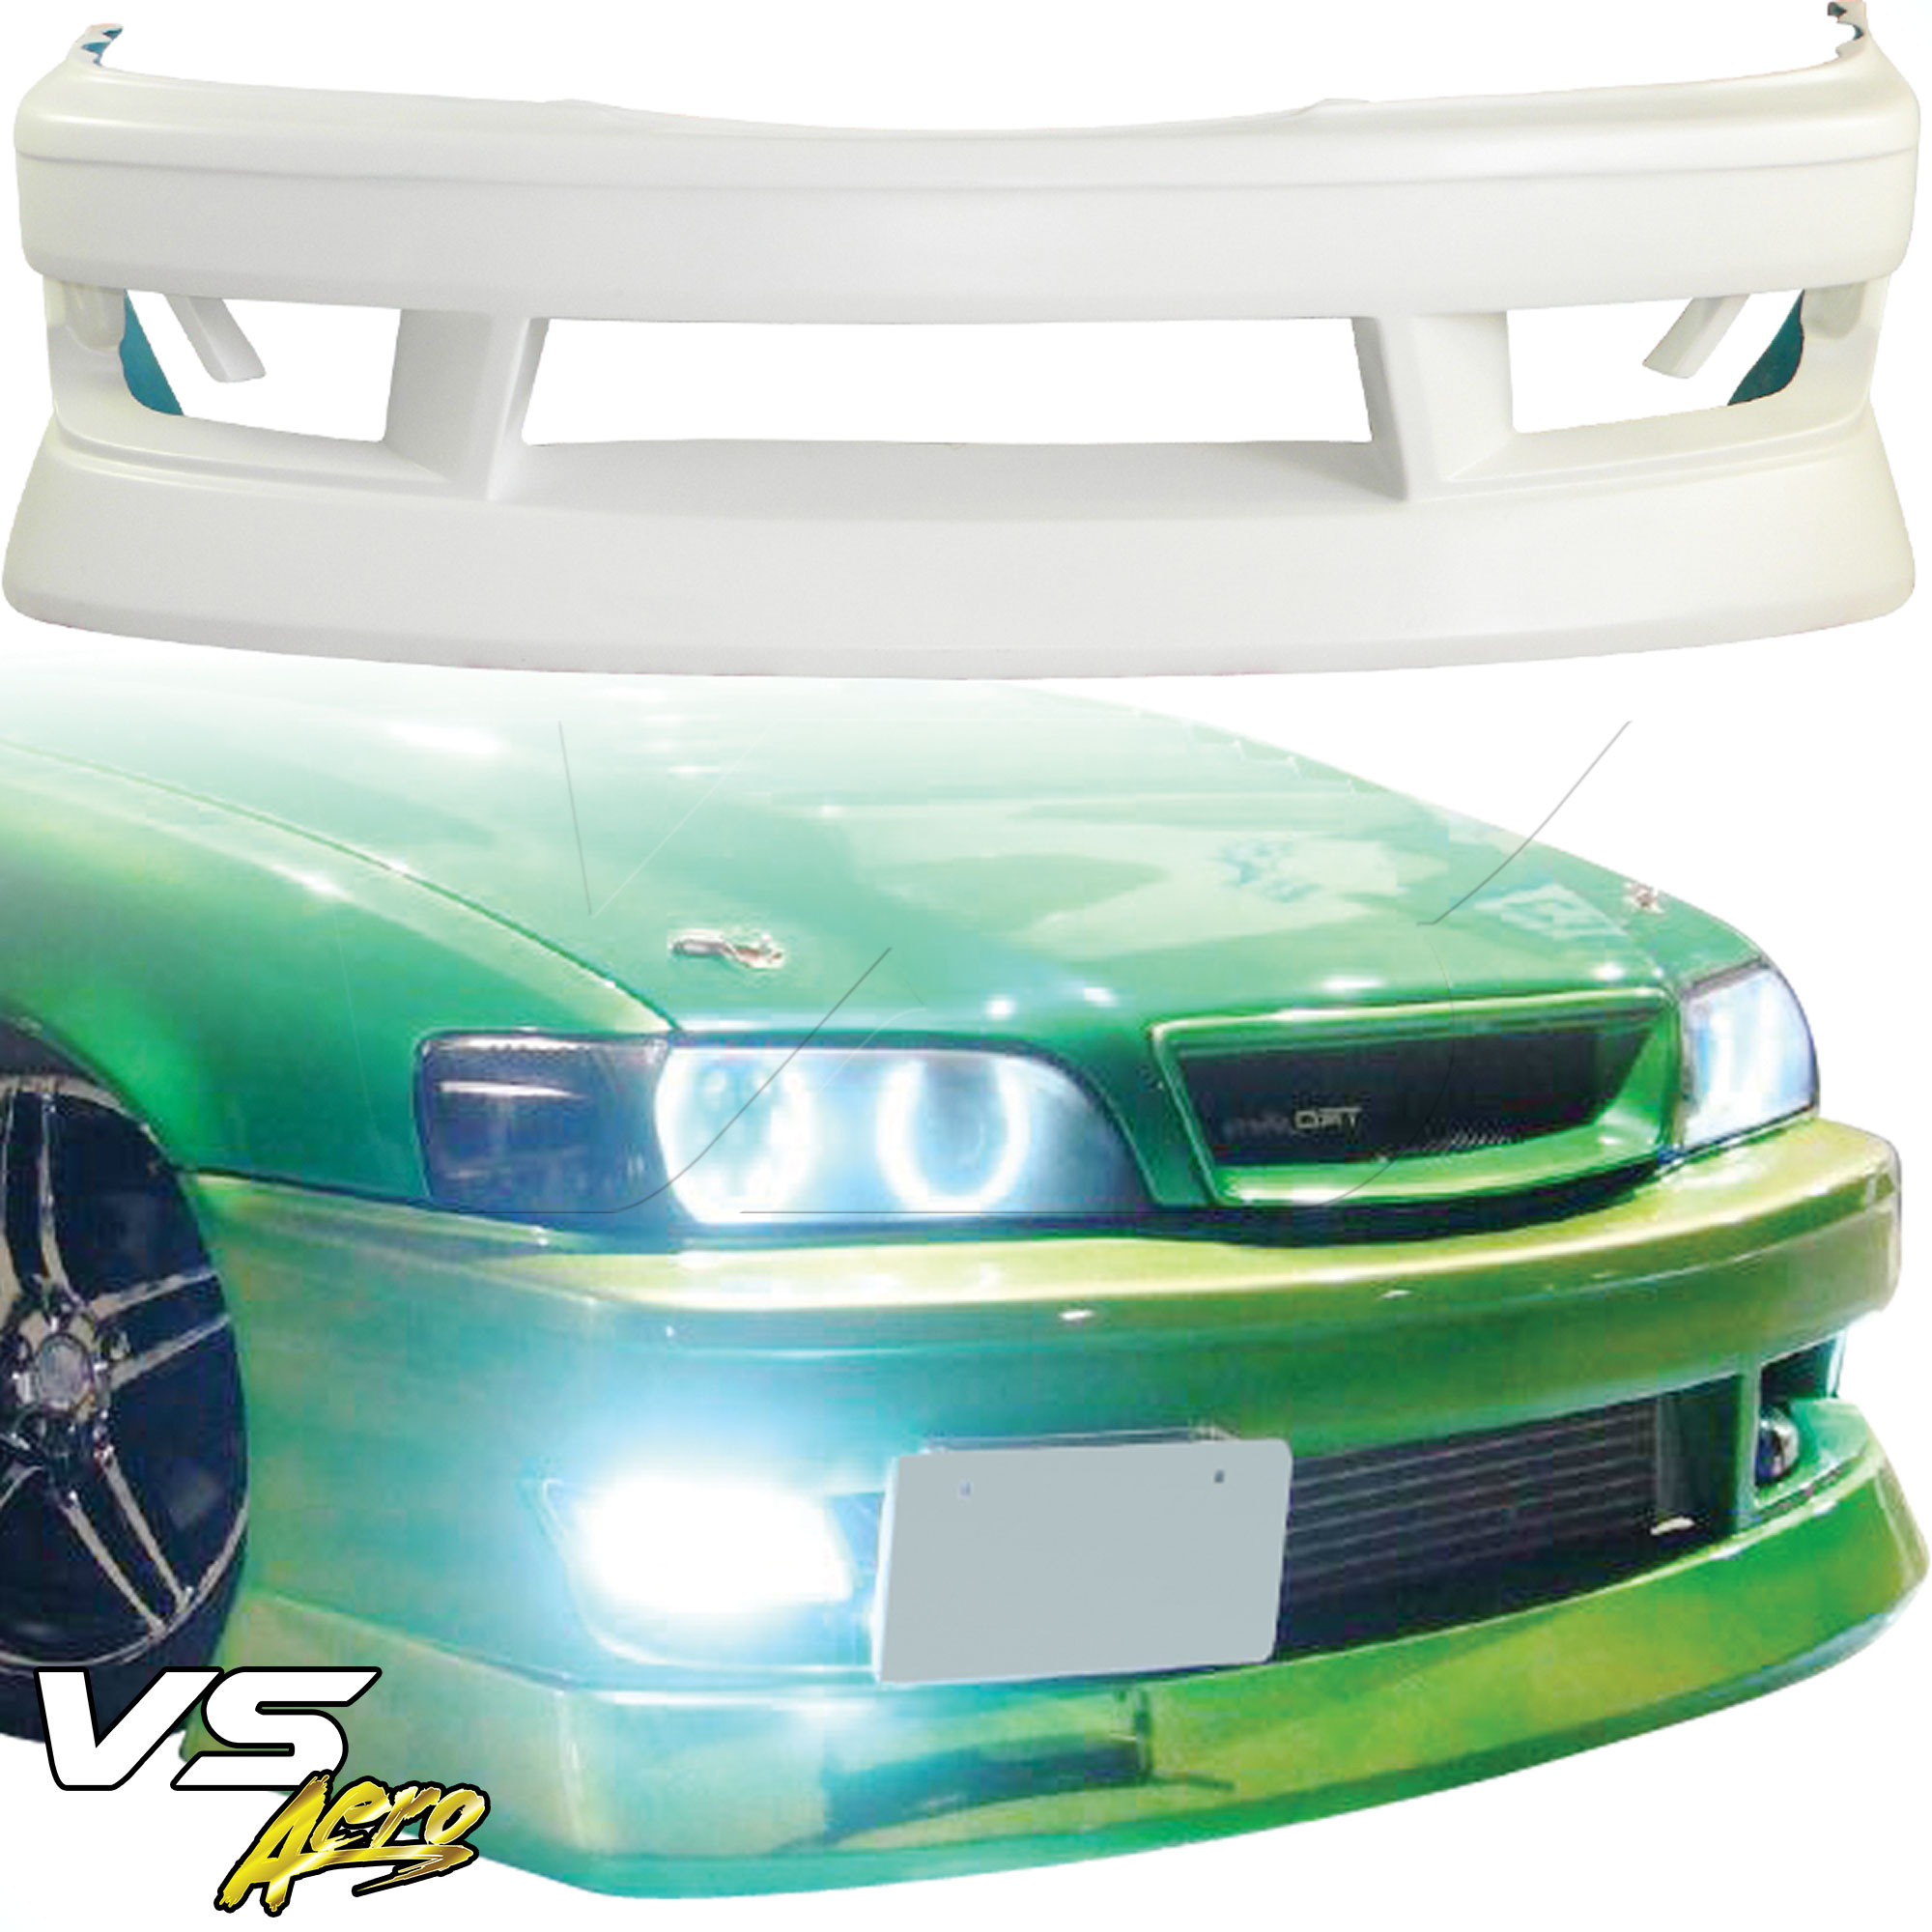 VSaero FRP BSPO Front Bumper > Toyota Chaser JZX100 1996-2000 - Image 10